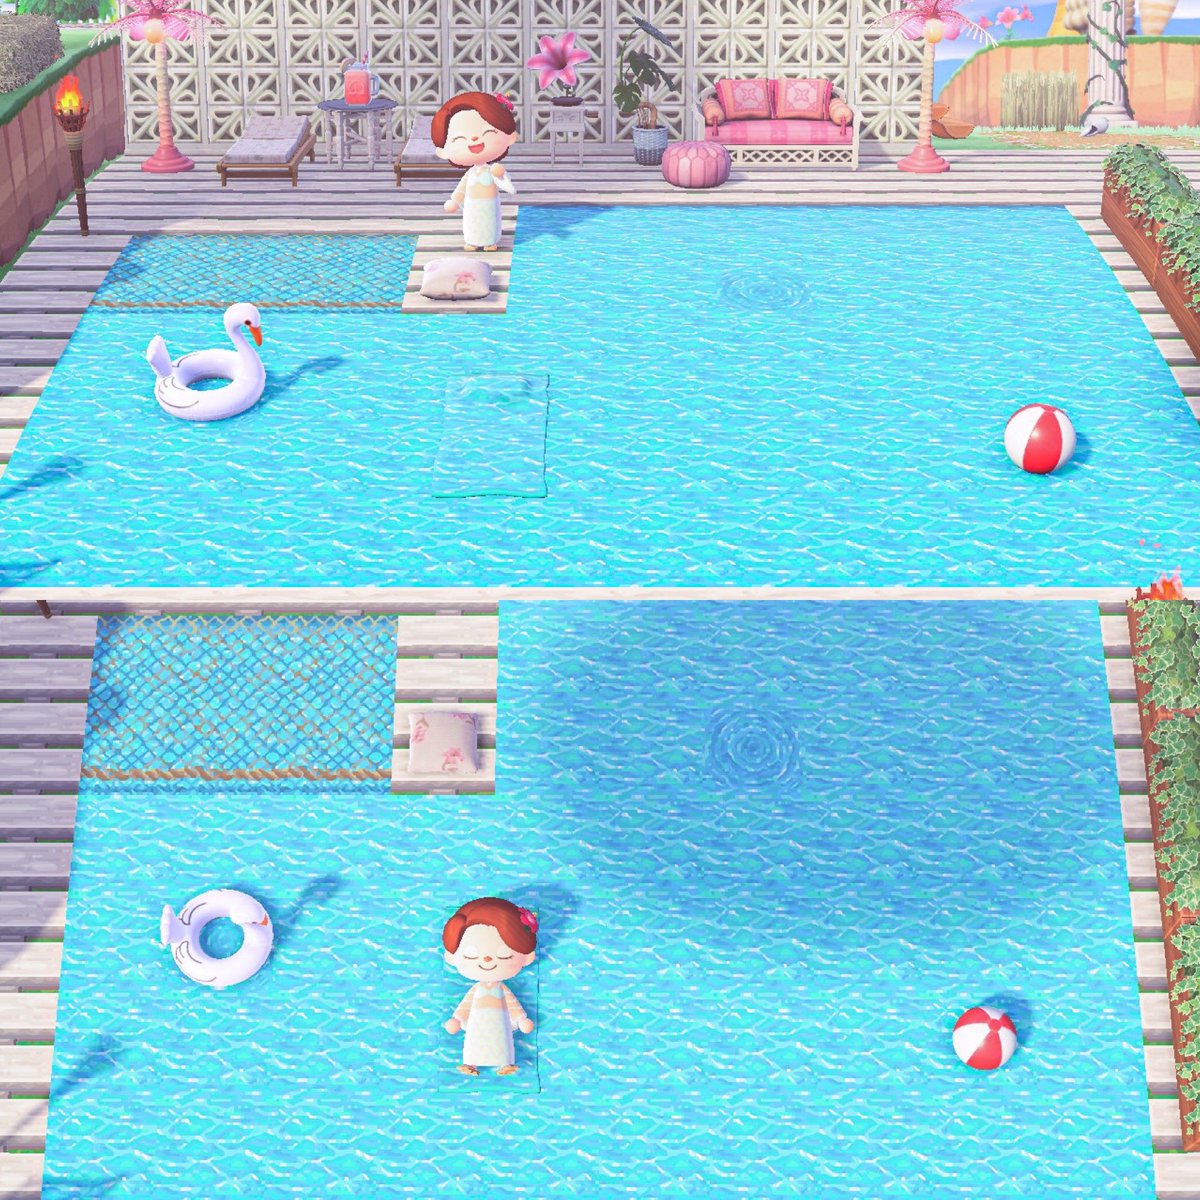 A cool retreat on Ashland🌴💦😎🌺 Anyone care to join me for a soak in the pool?? #acnh #acnhdesign #animalcrossingnewhorizons #AnimalCrossingDesign